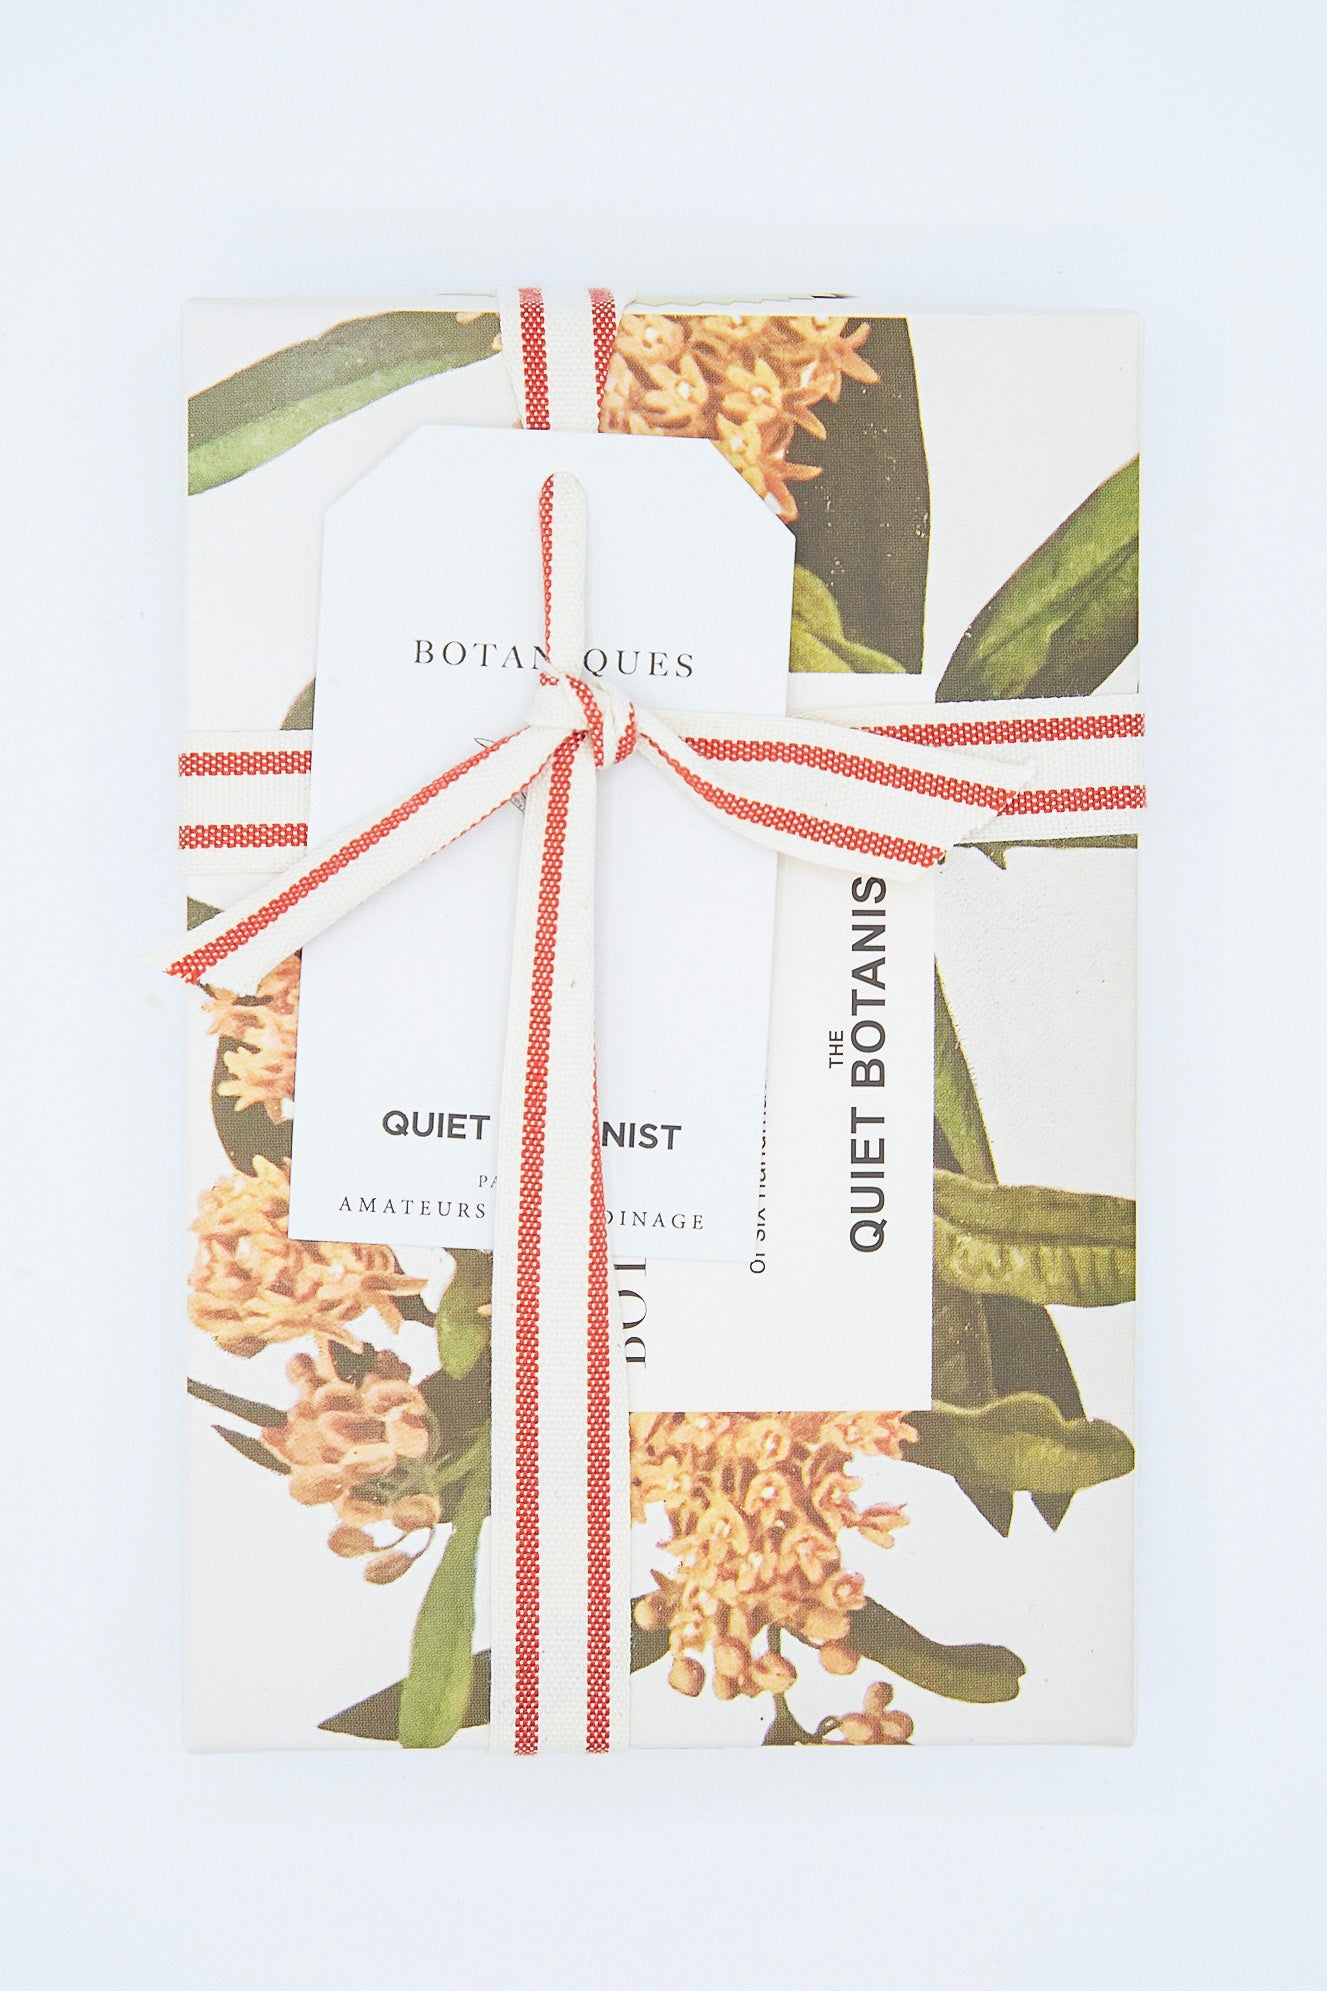 A limited edition box of Chocolate Botanical Bon Bons, gift wrapped in a white and red ribbon by The Quiet Botanist.